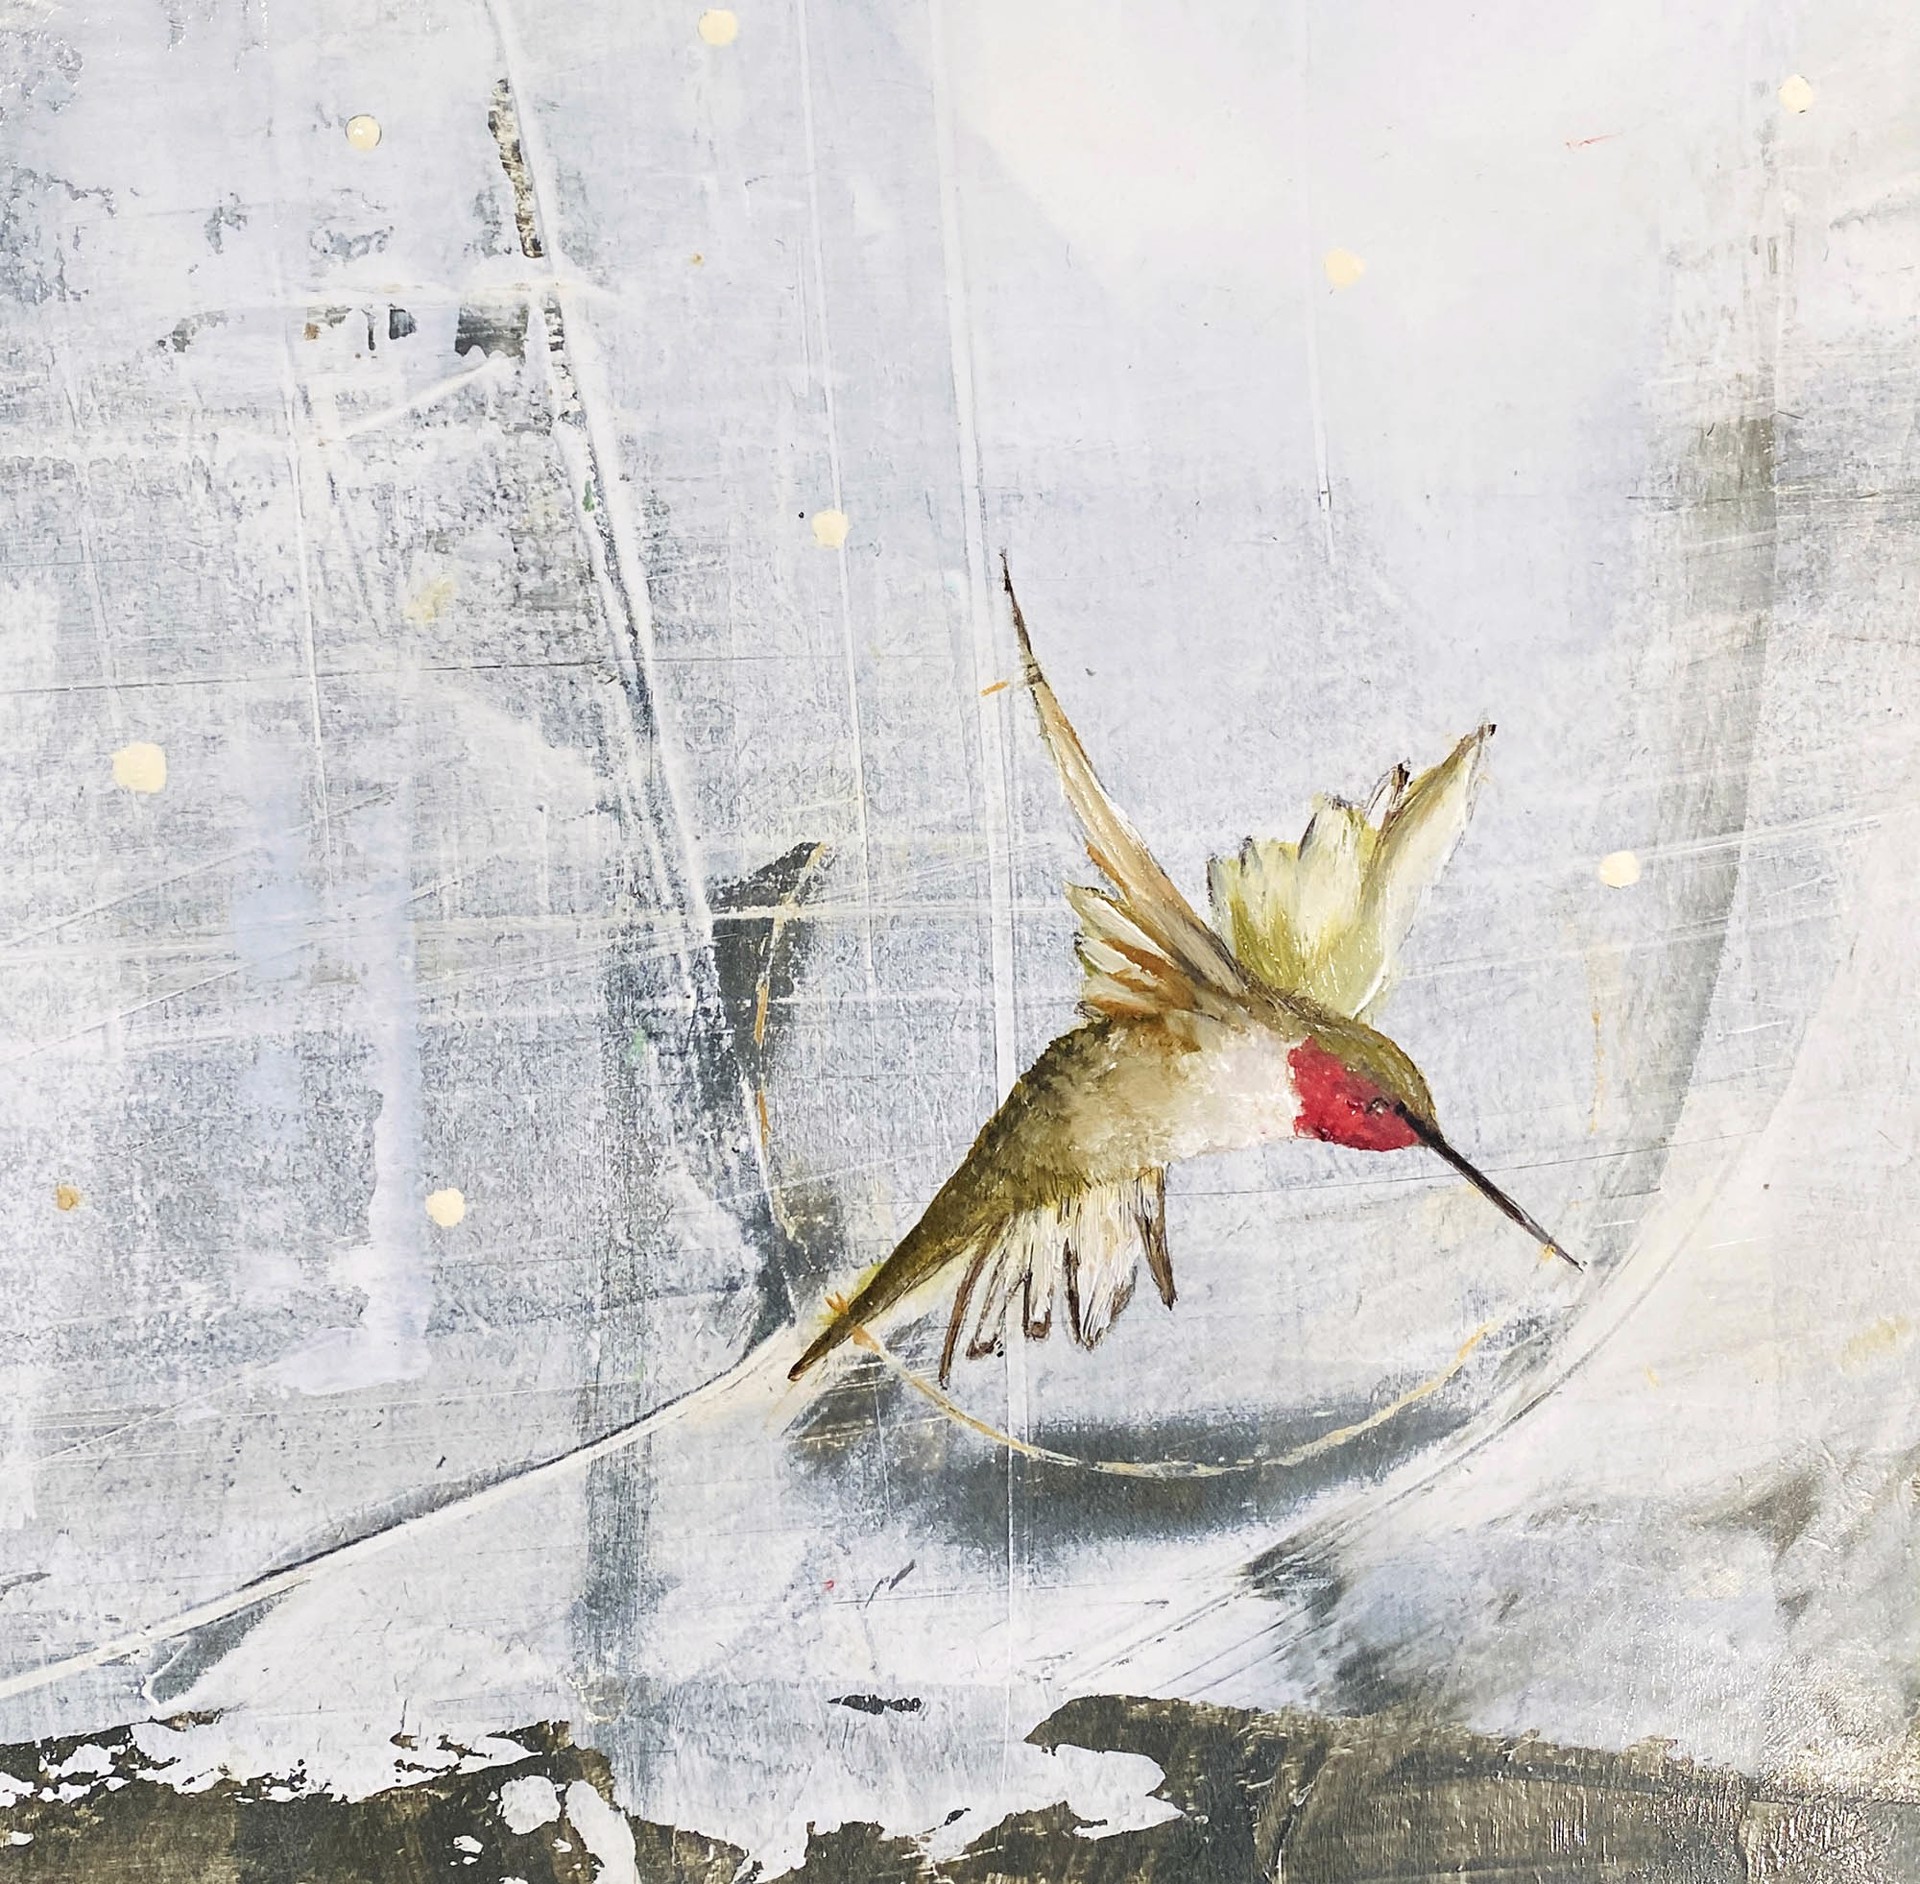 Original Oil Painting Featuring A Single Hummingbird Over Abstract Gray Background